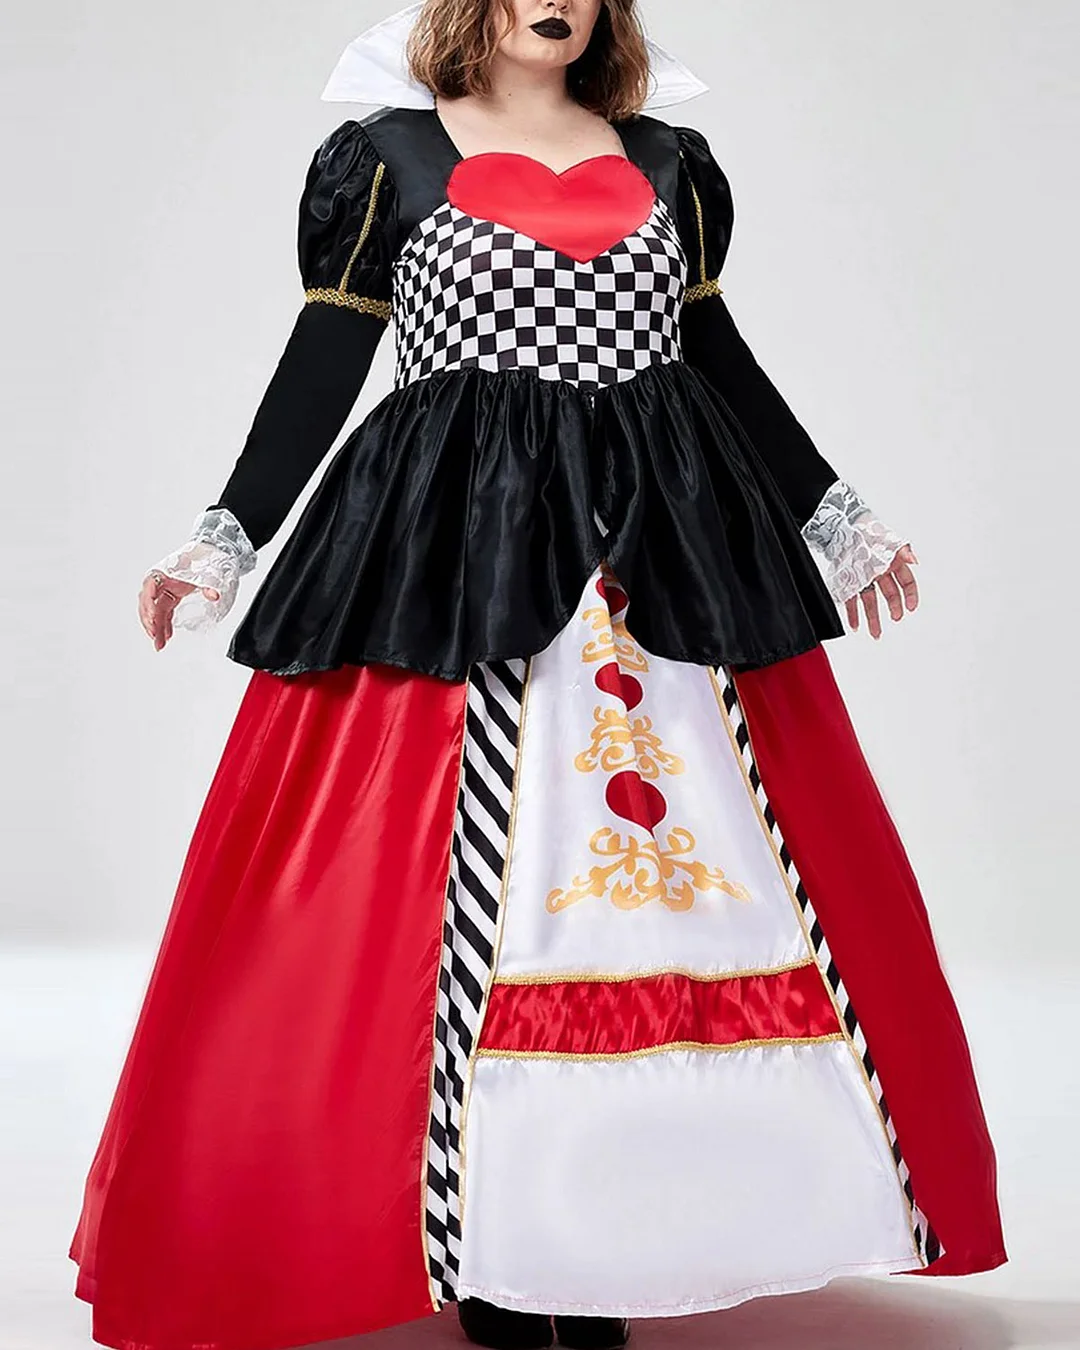 Design Plus Size Halloween Costumes Cosplay Queen Of Hearts Checkered Print Lace Puff Sleeves Maxi Dress (Without Crown)